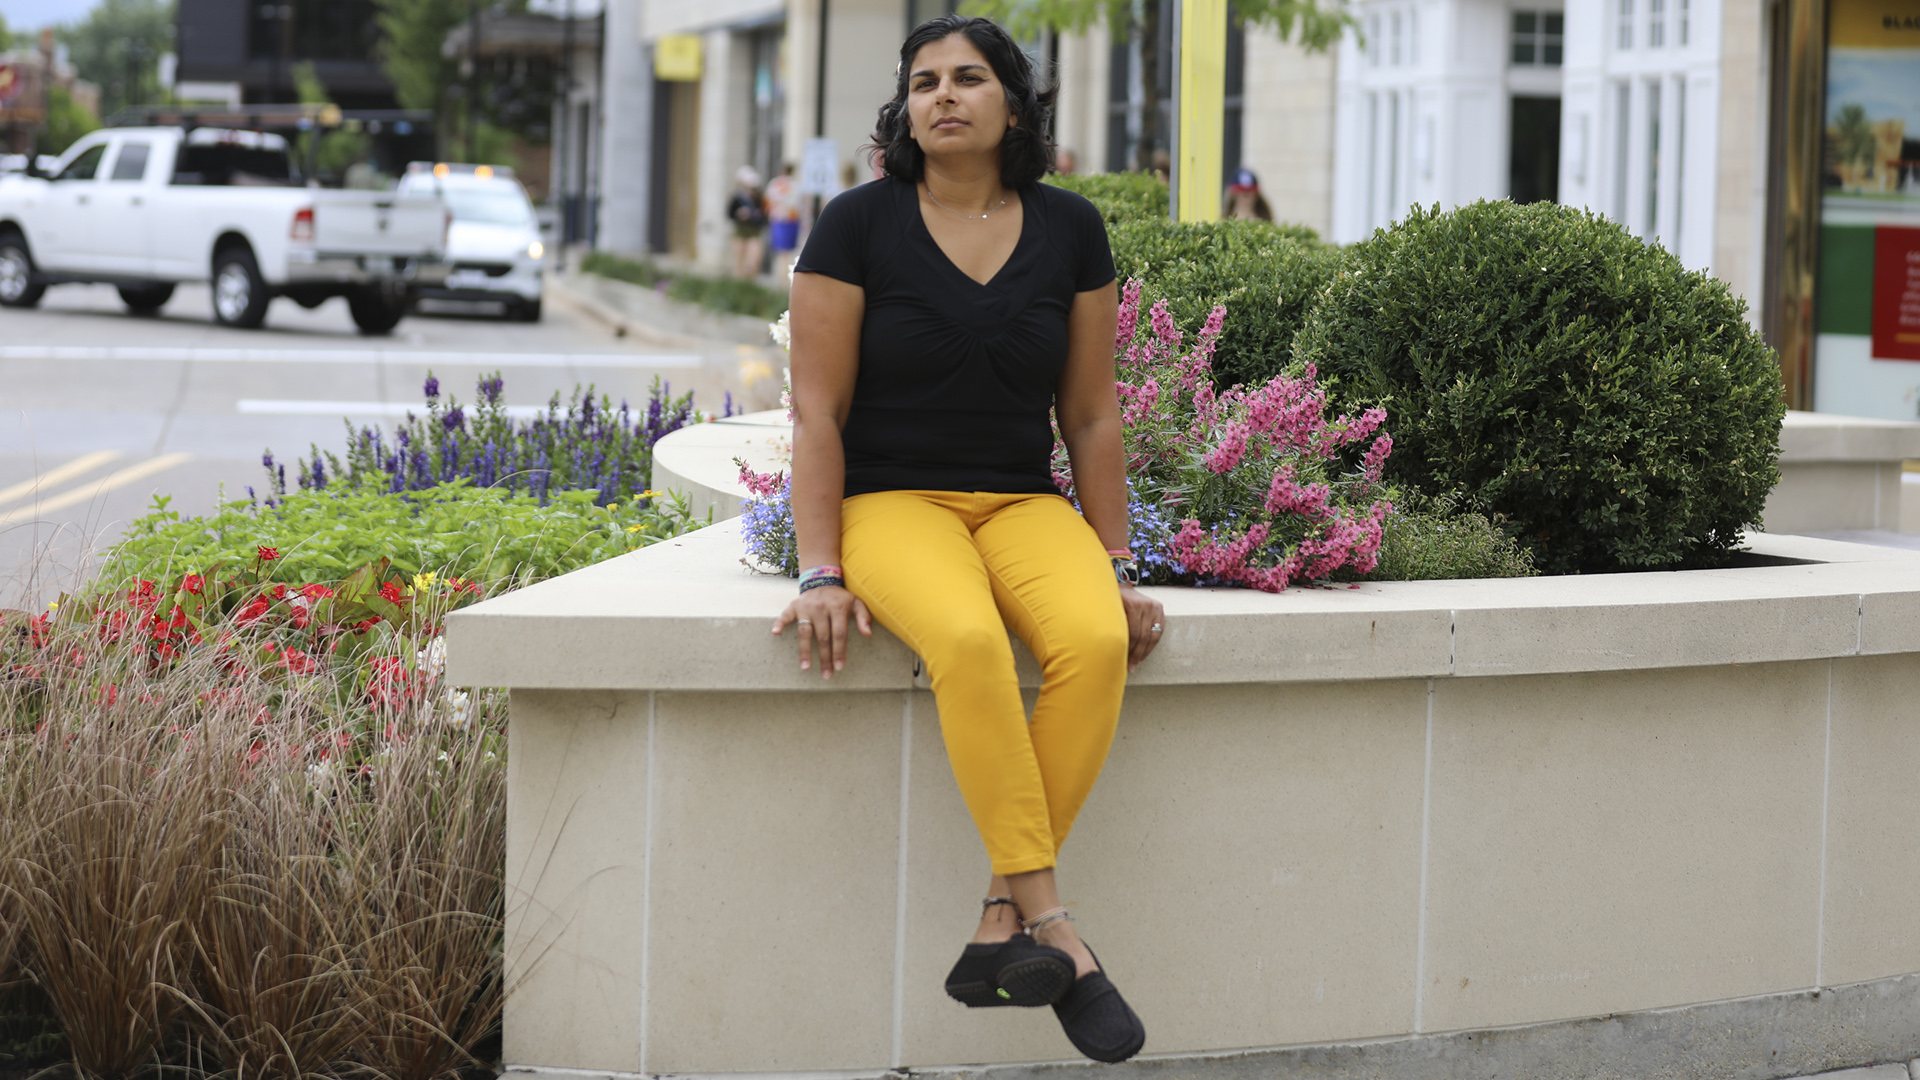 Shefaali Sharma sits on a concrete planter in front of a variety of bushes and shrubs, with a street with cars, pedestrians and building entrances in the background.